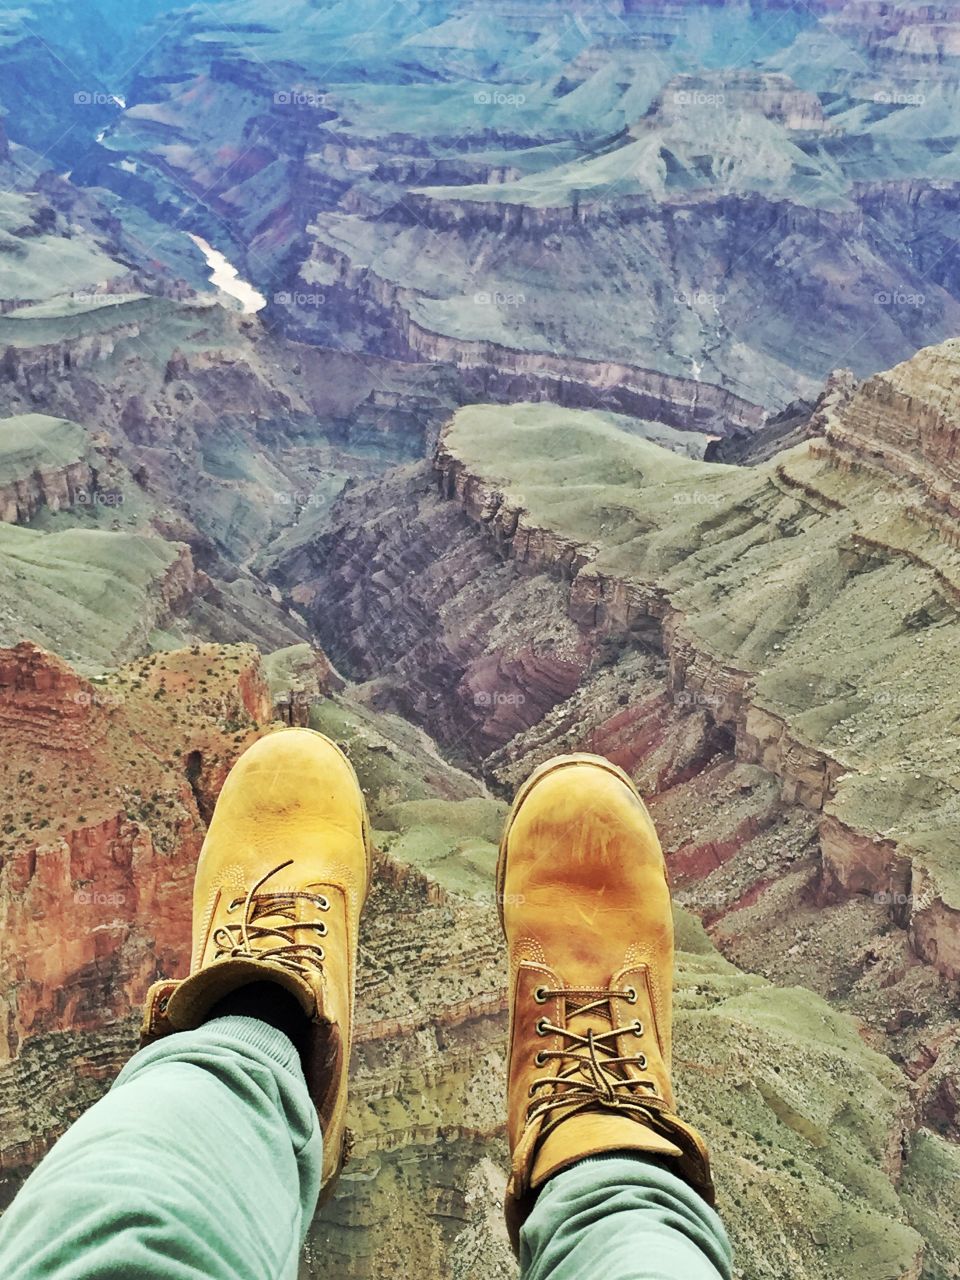 A dangerous moment of a man close to the grand canyon 